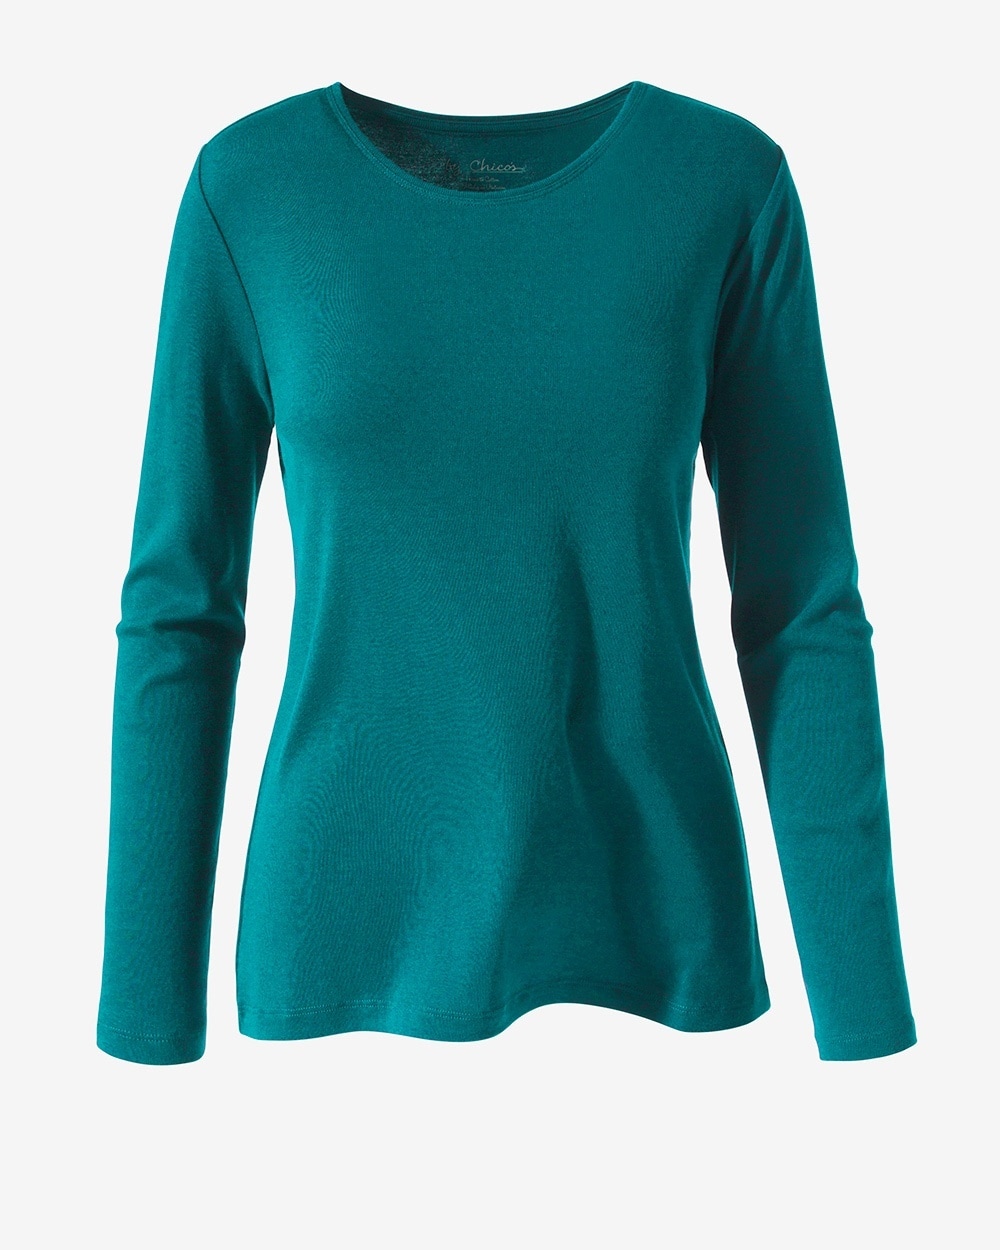 Long Sleeve Pullover Refined Teal Heather